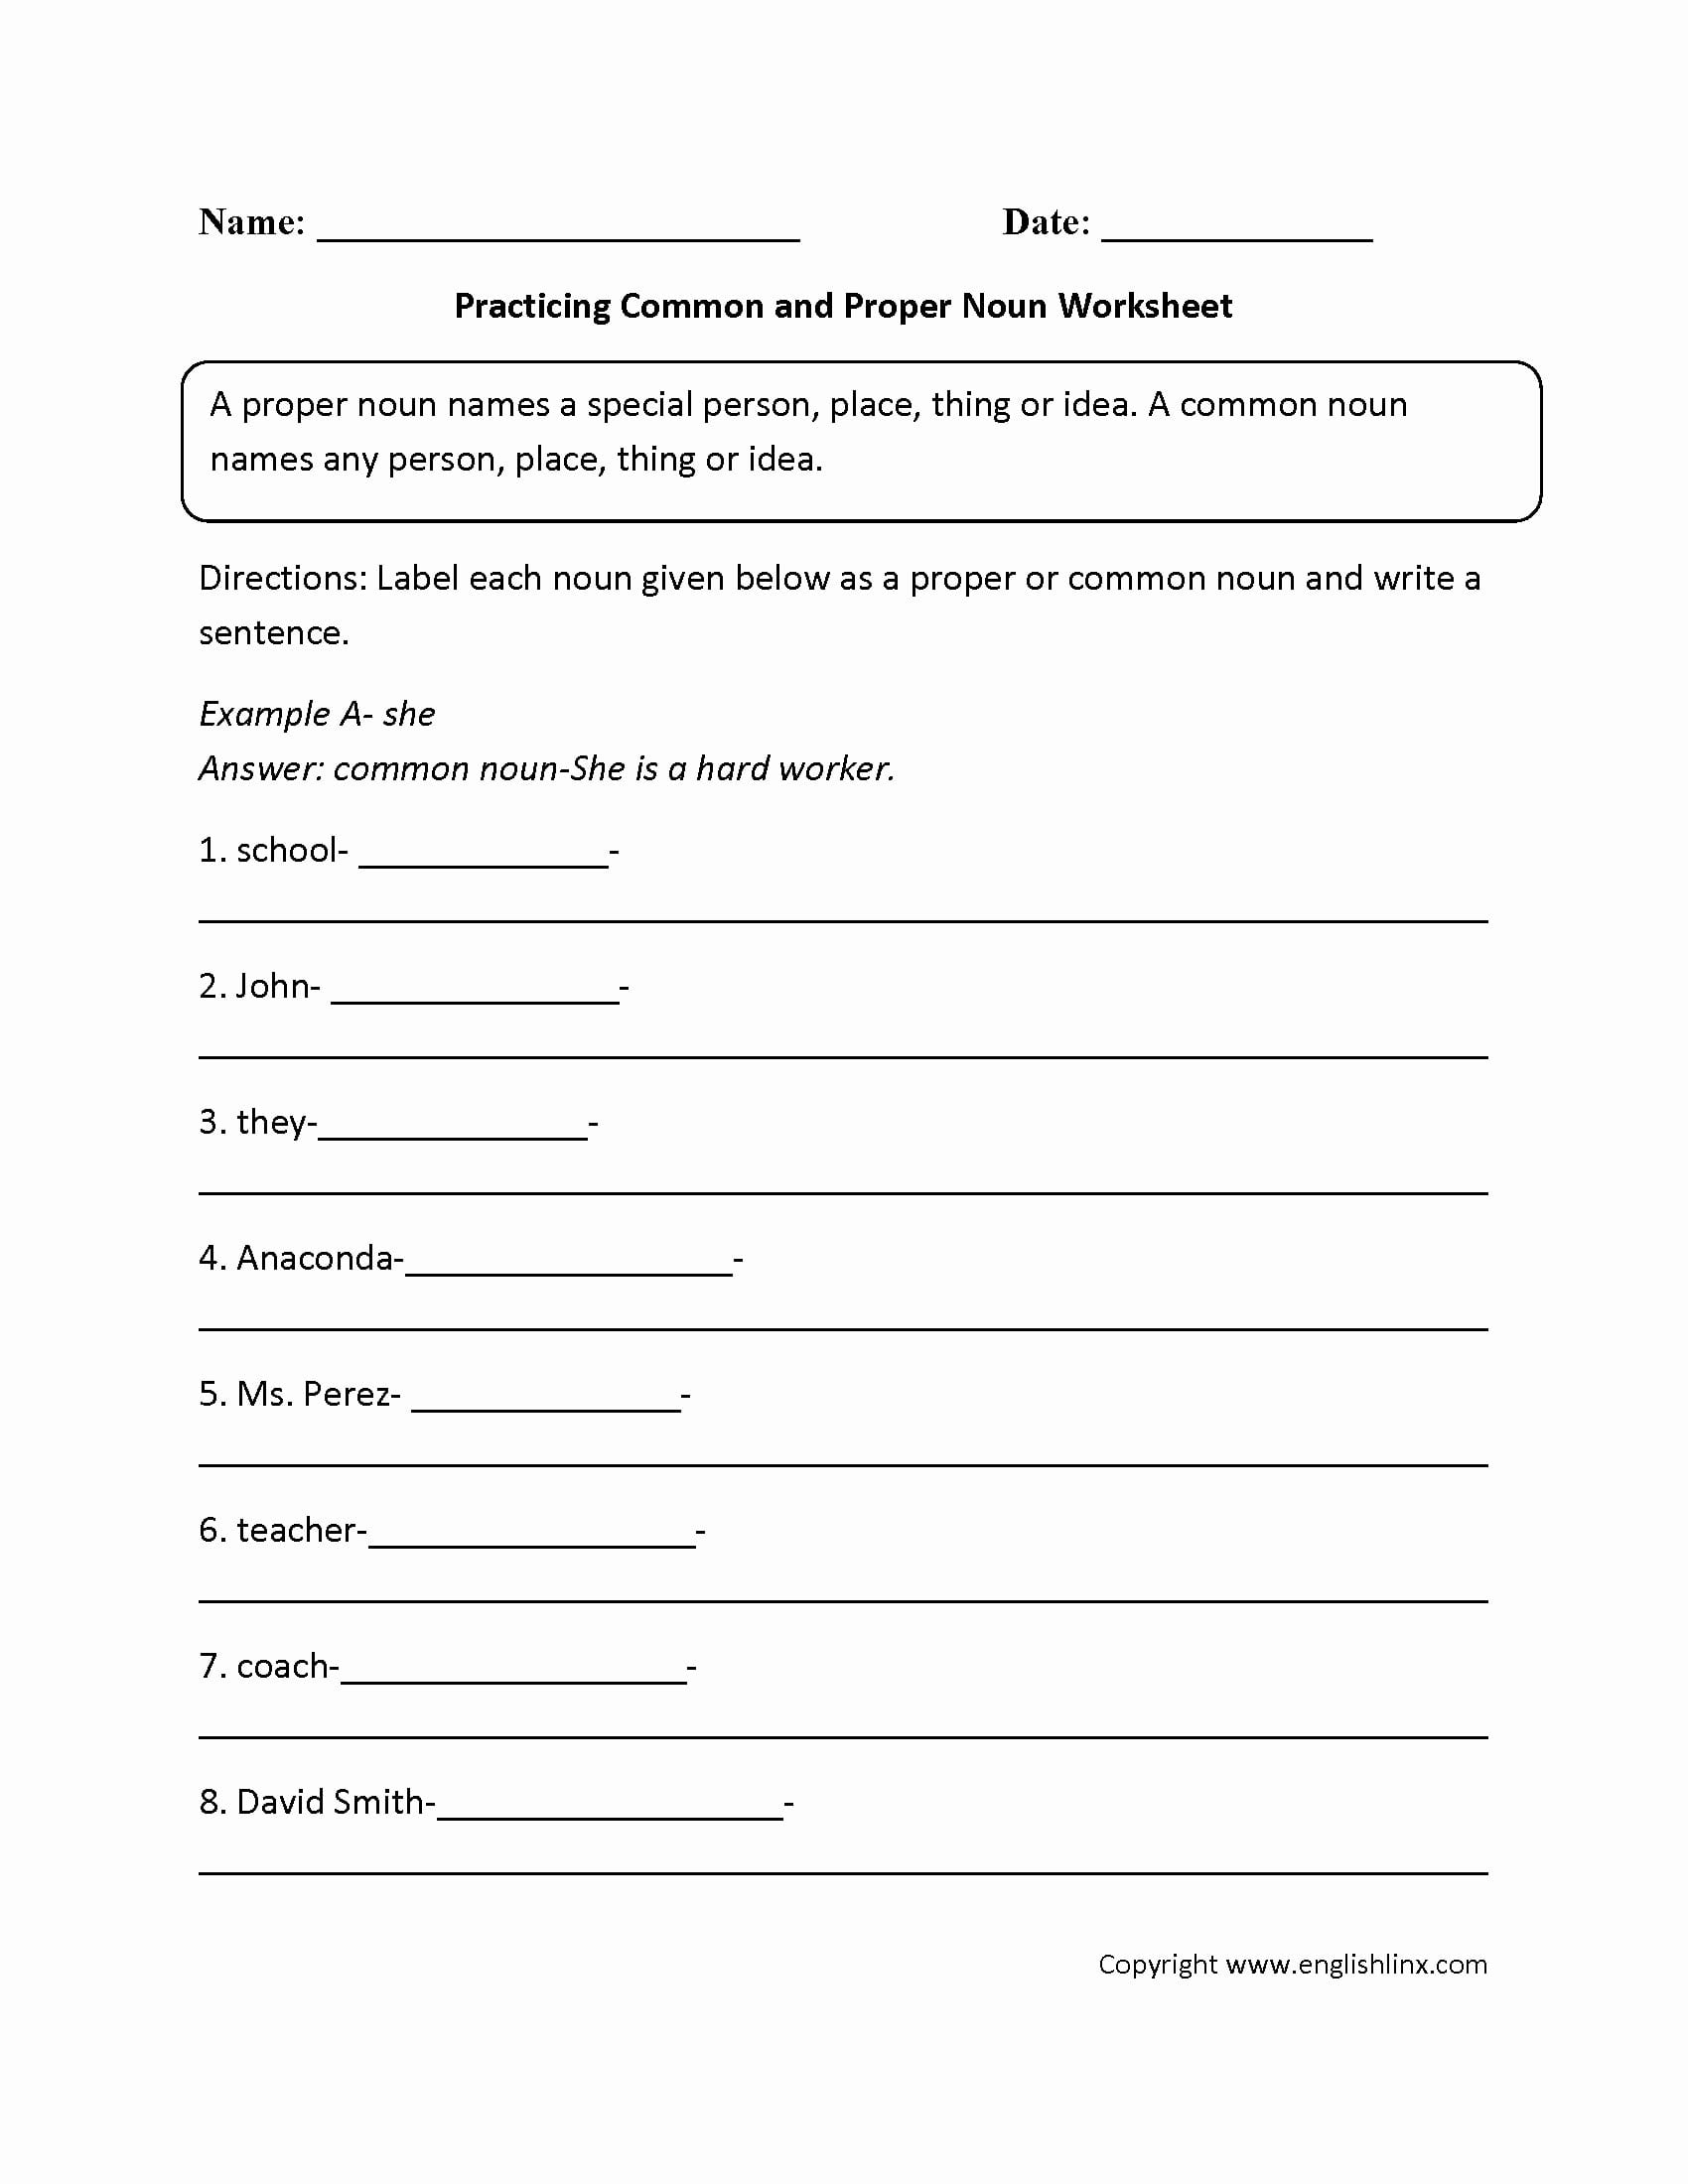 3Rd Grade Reading Staar Test Practice Worksheets For Download  Math With Regard To 3Rd Grade Reading Staar Test Practice Worksheets